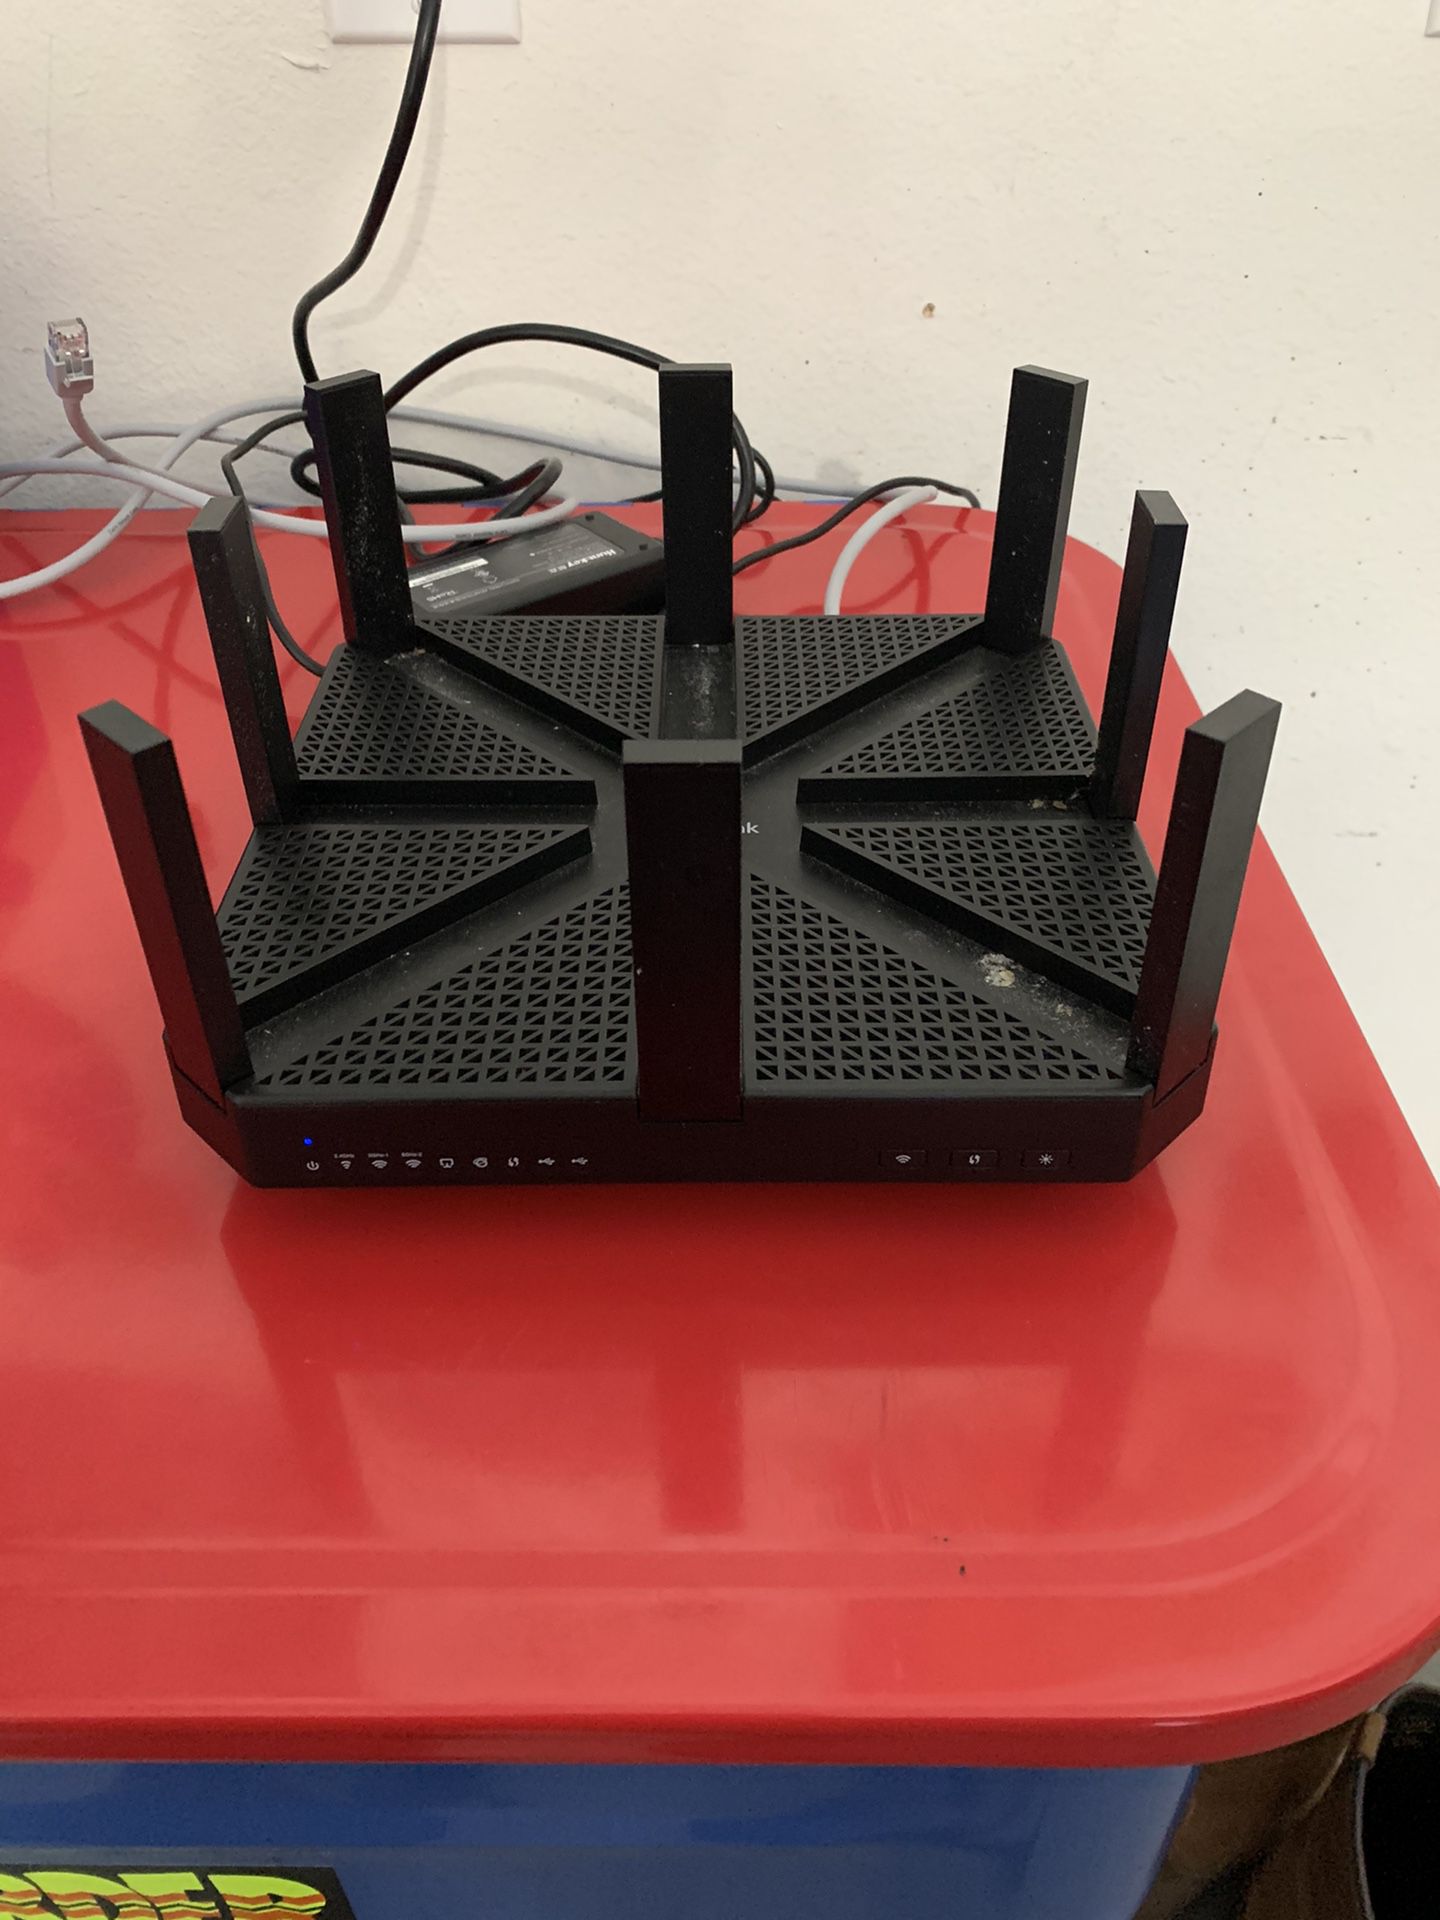 Gaming WiFi router